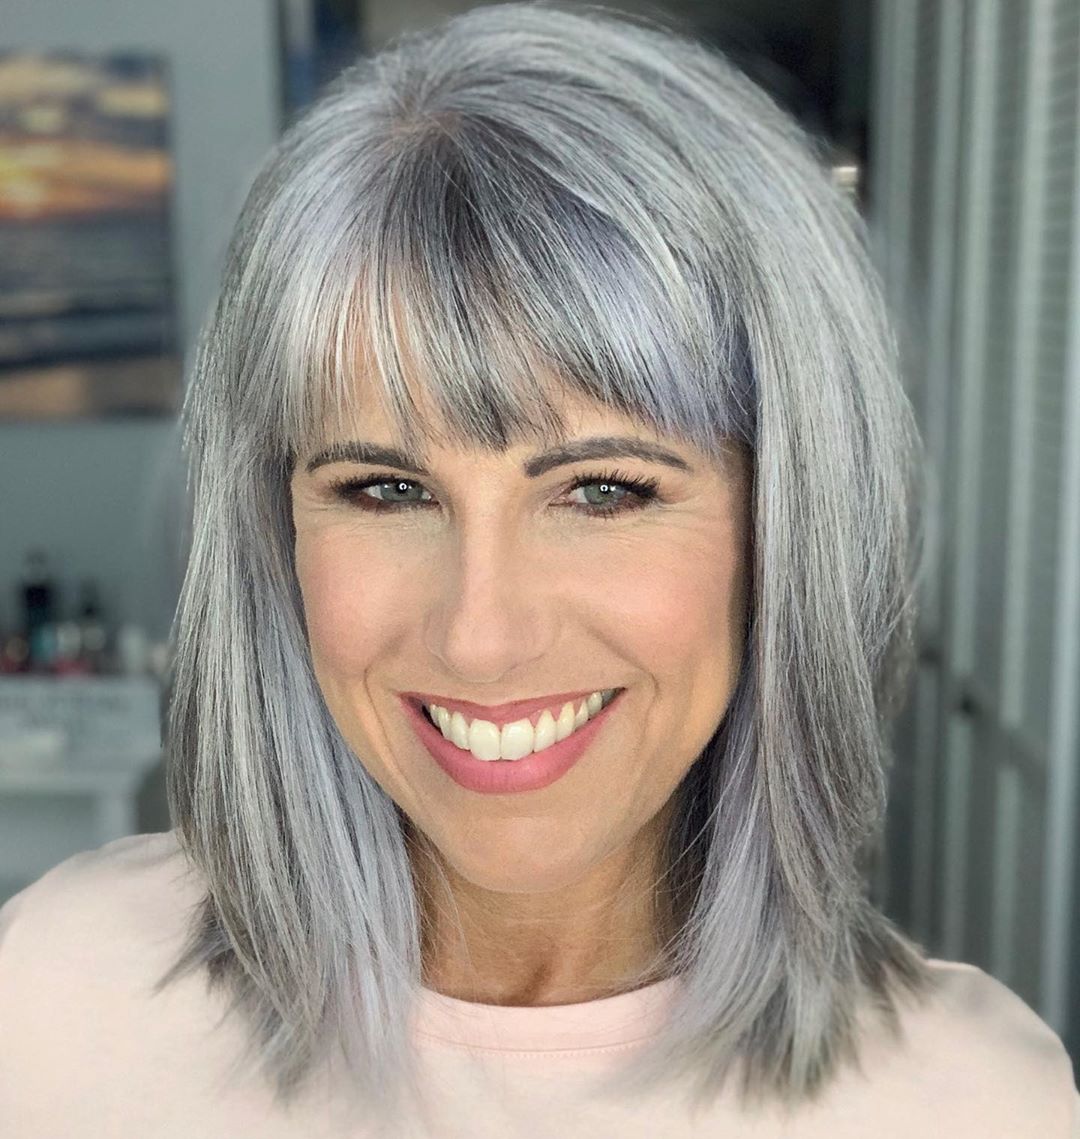 39+ Hairstyles with bangs over 50 information